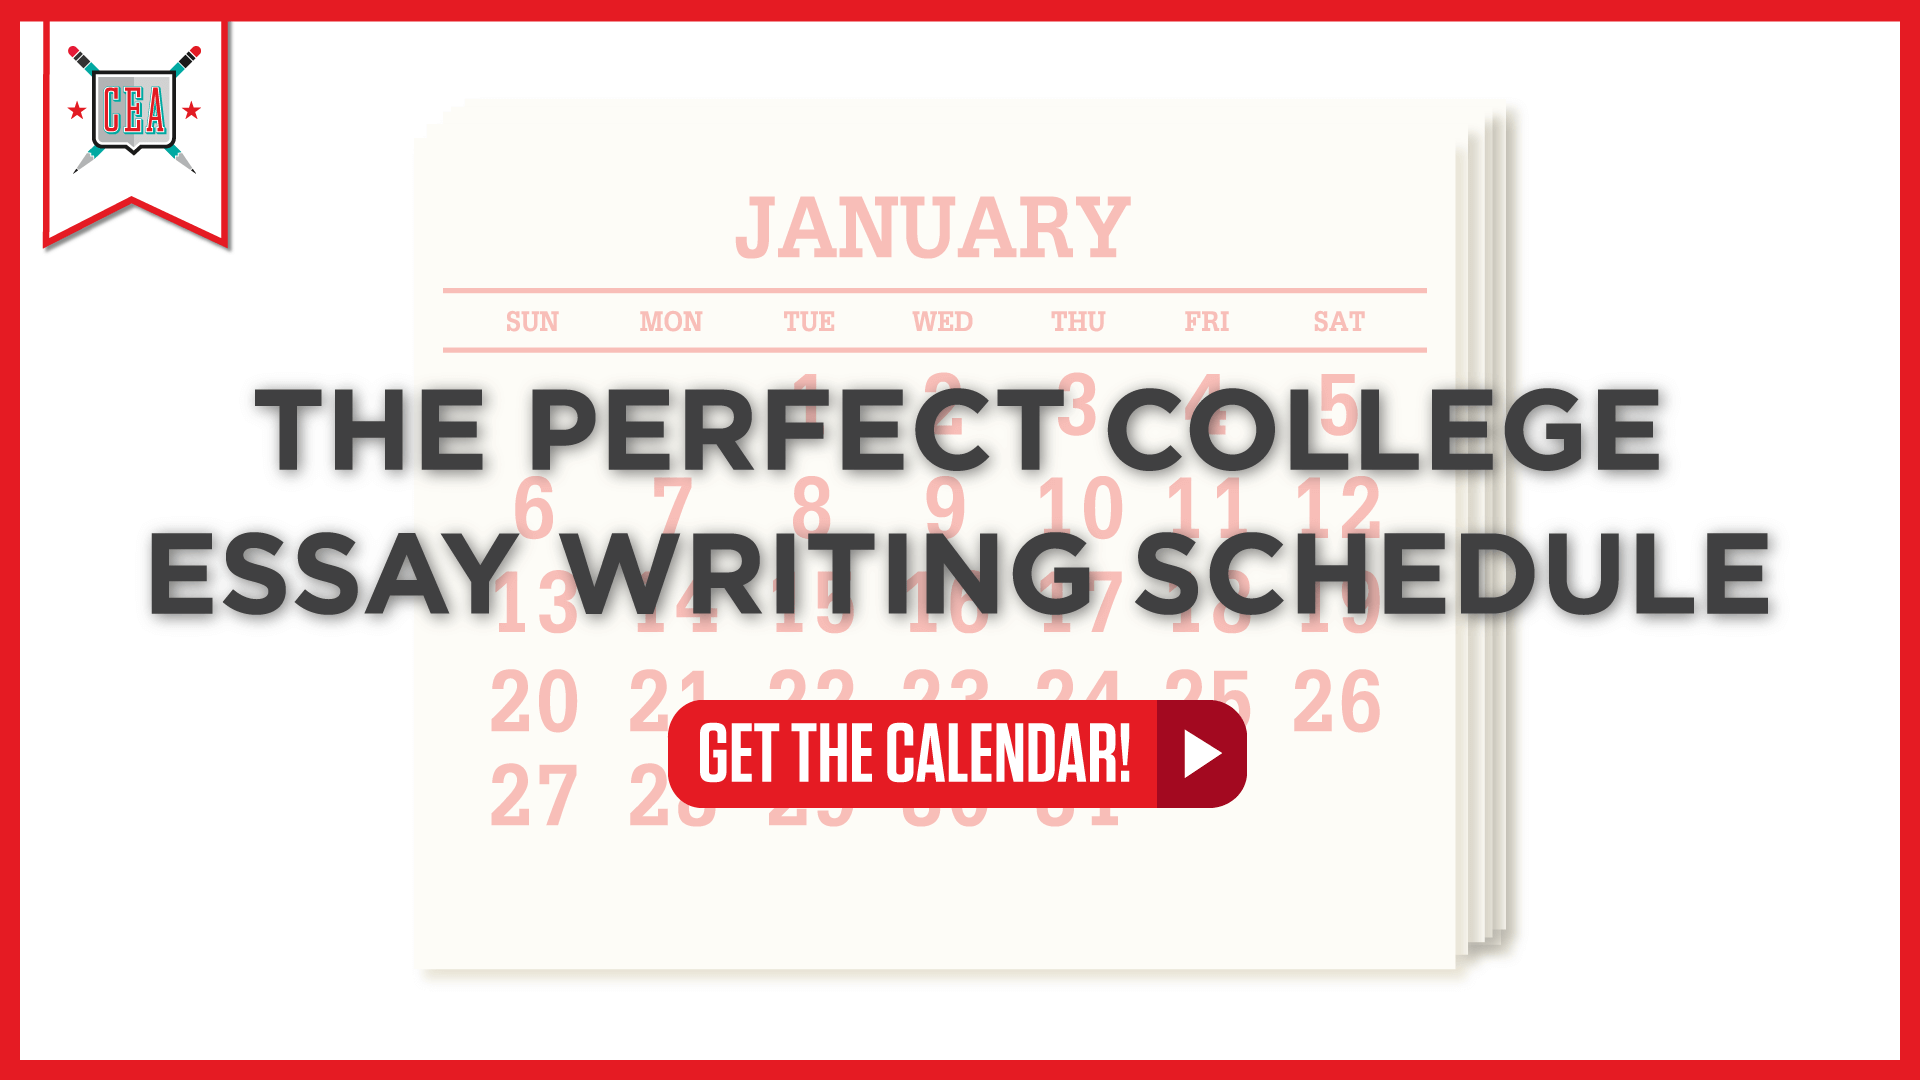 The Perfect College Essay Writing Schedule